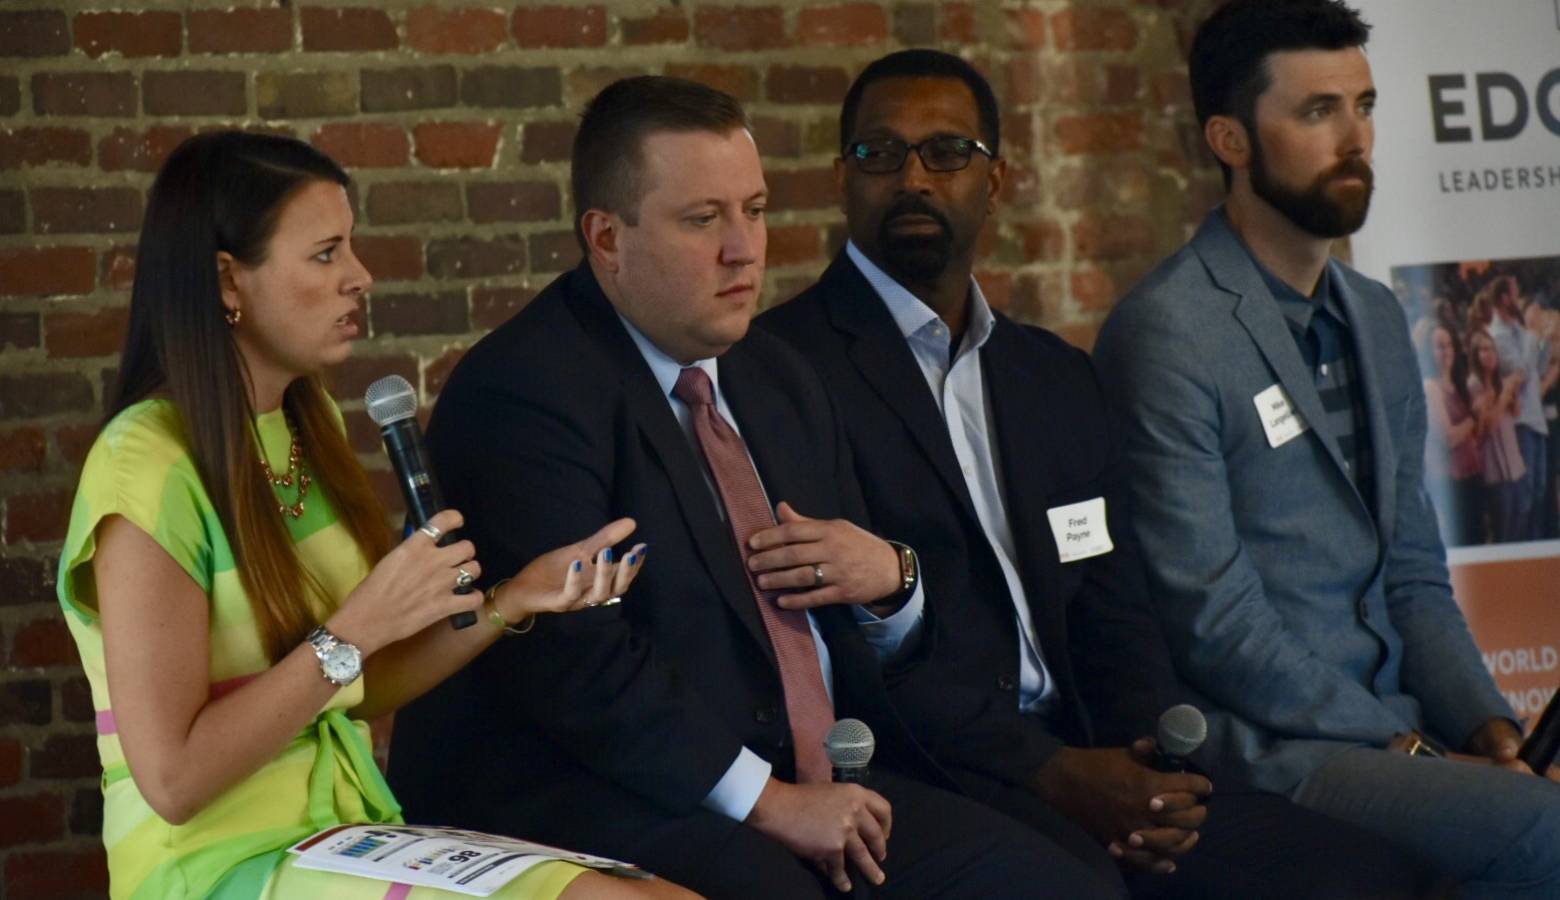 Panelists including Indiana Career Connections and Talent Secretary Blair Milo and Department of Workforce Development Commissioner Fred Payne spoke about "brain gain" efforts in Indiana. (Justin Hicks/IPB News)